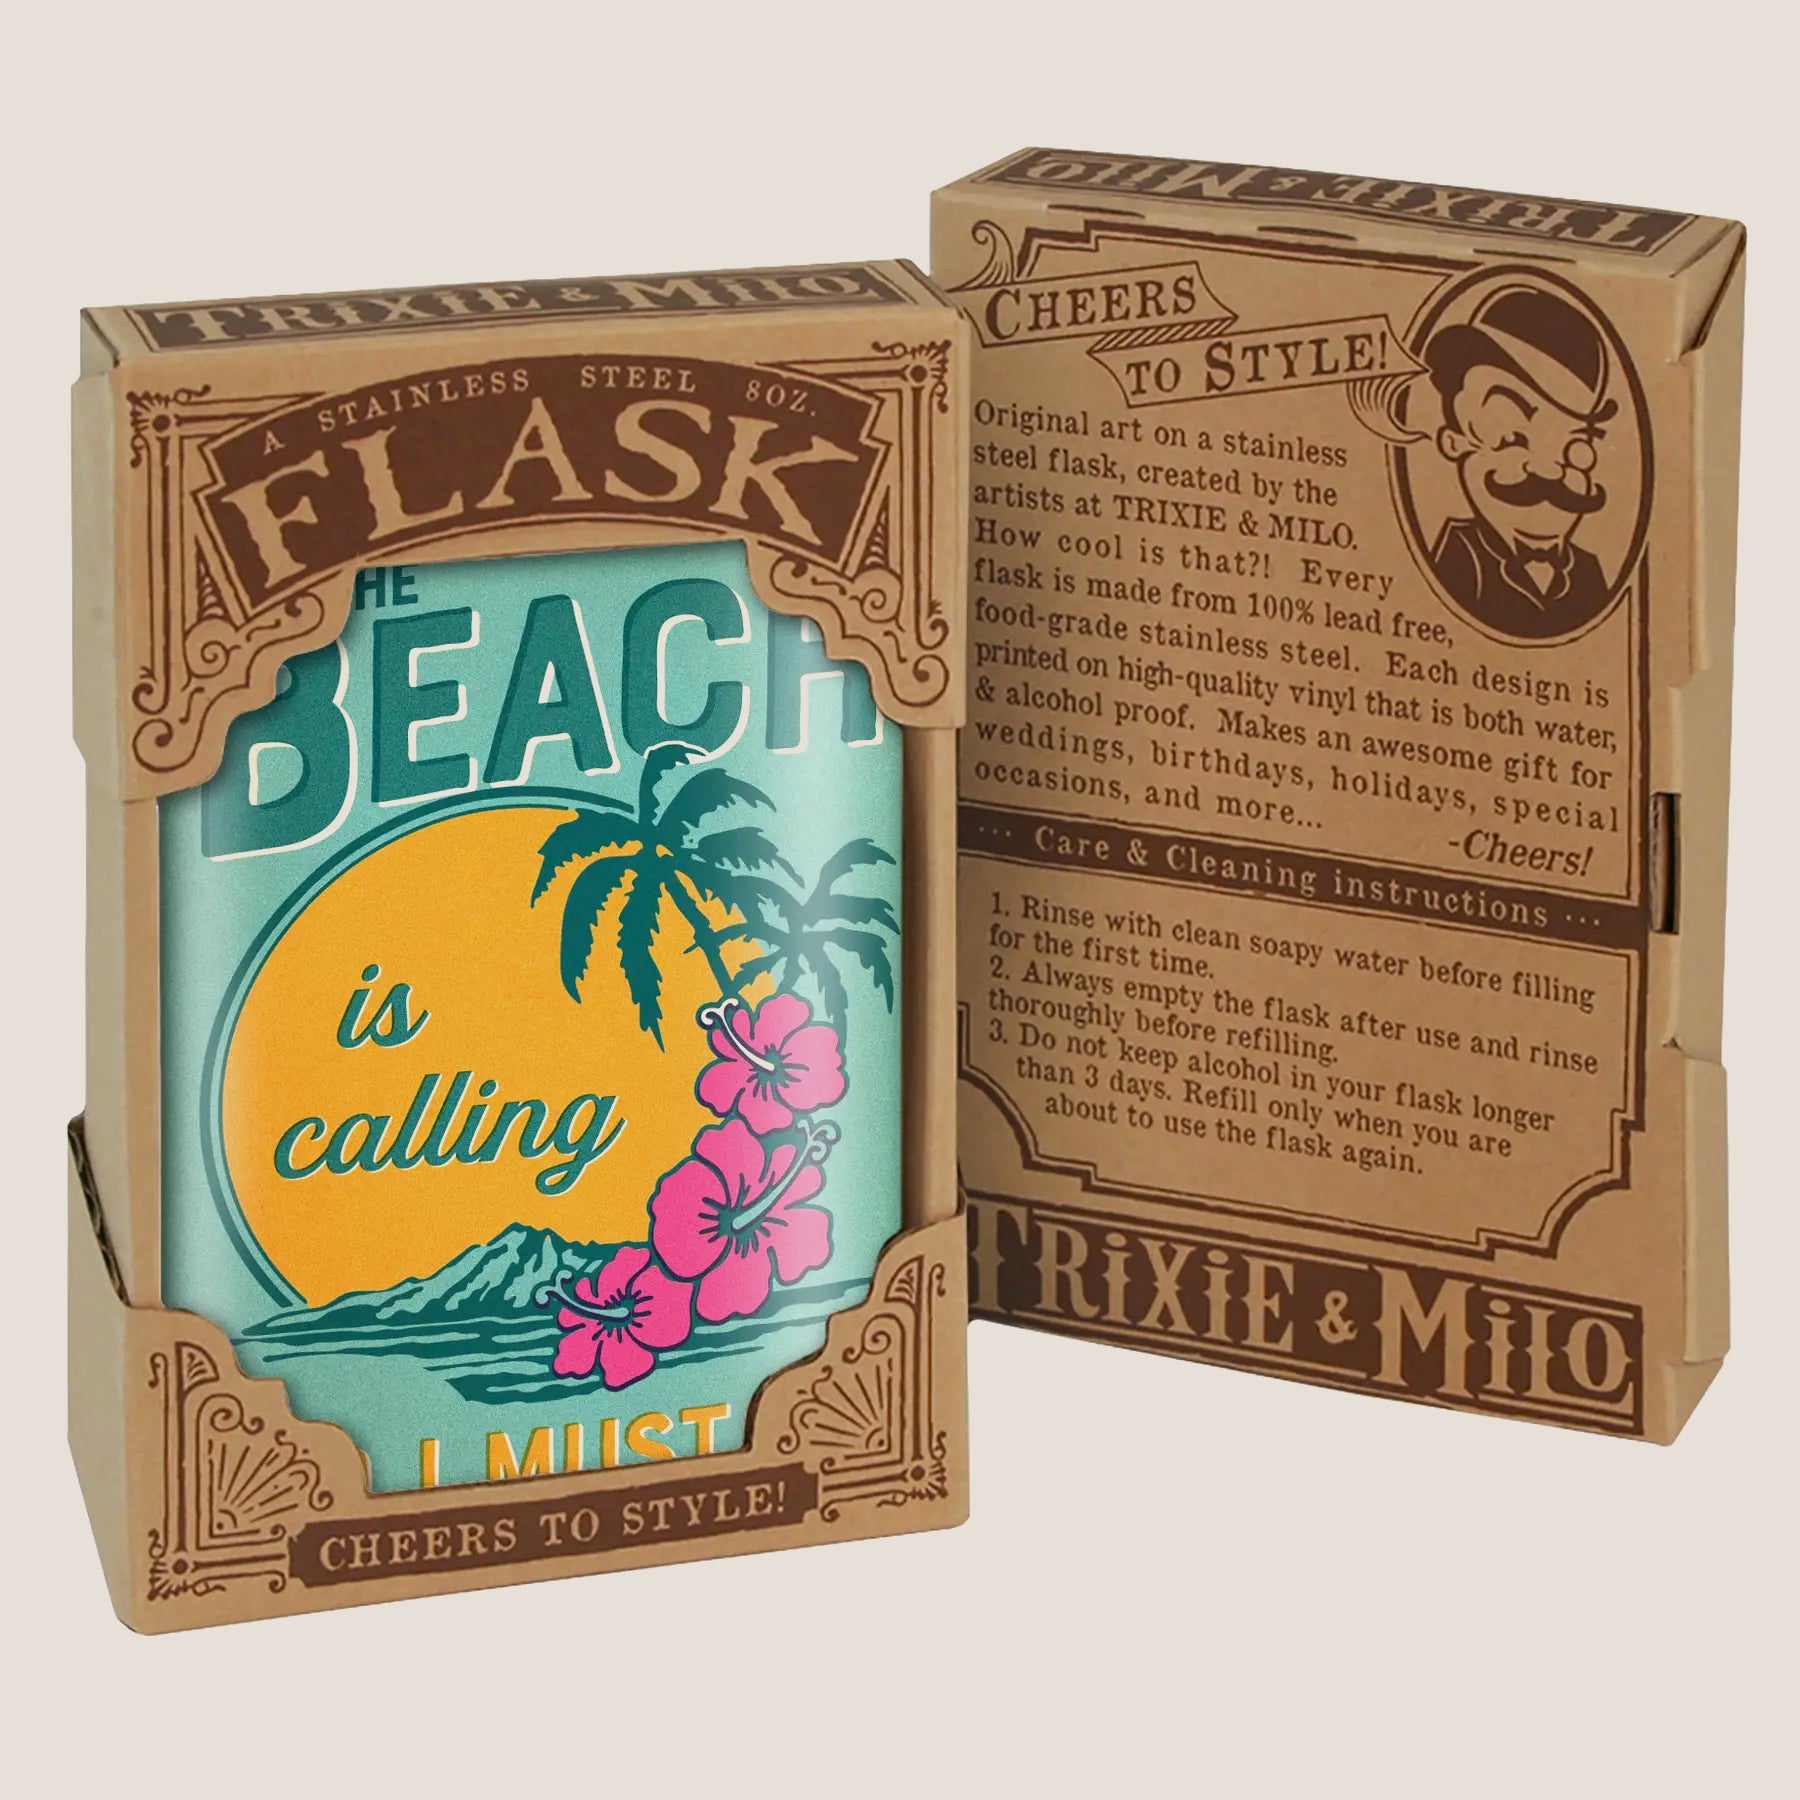 8 oz. Hip Flask: The Beach Is Calling, And I Must Go Kick off every holiday or summer beach party with confidence. Cool stylish stainless steel drinking flask. Designed for durability and aesthetic appeal in gift box